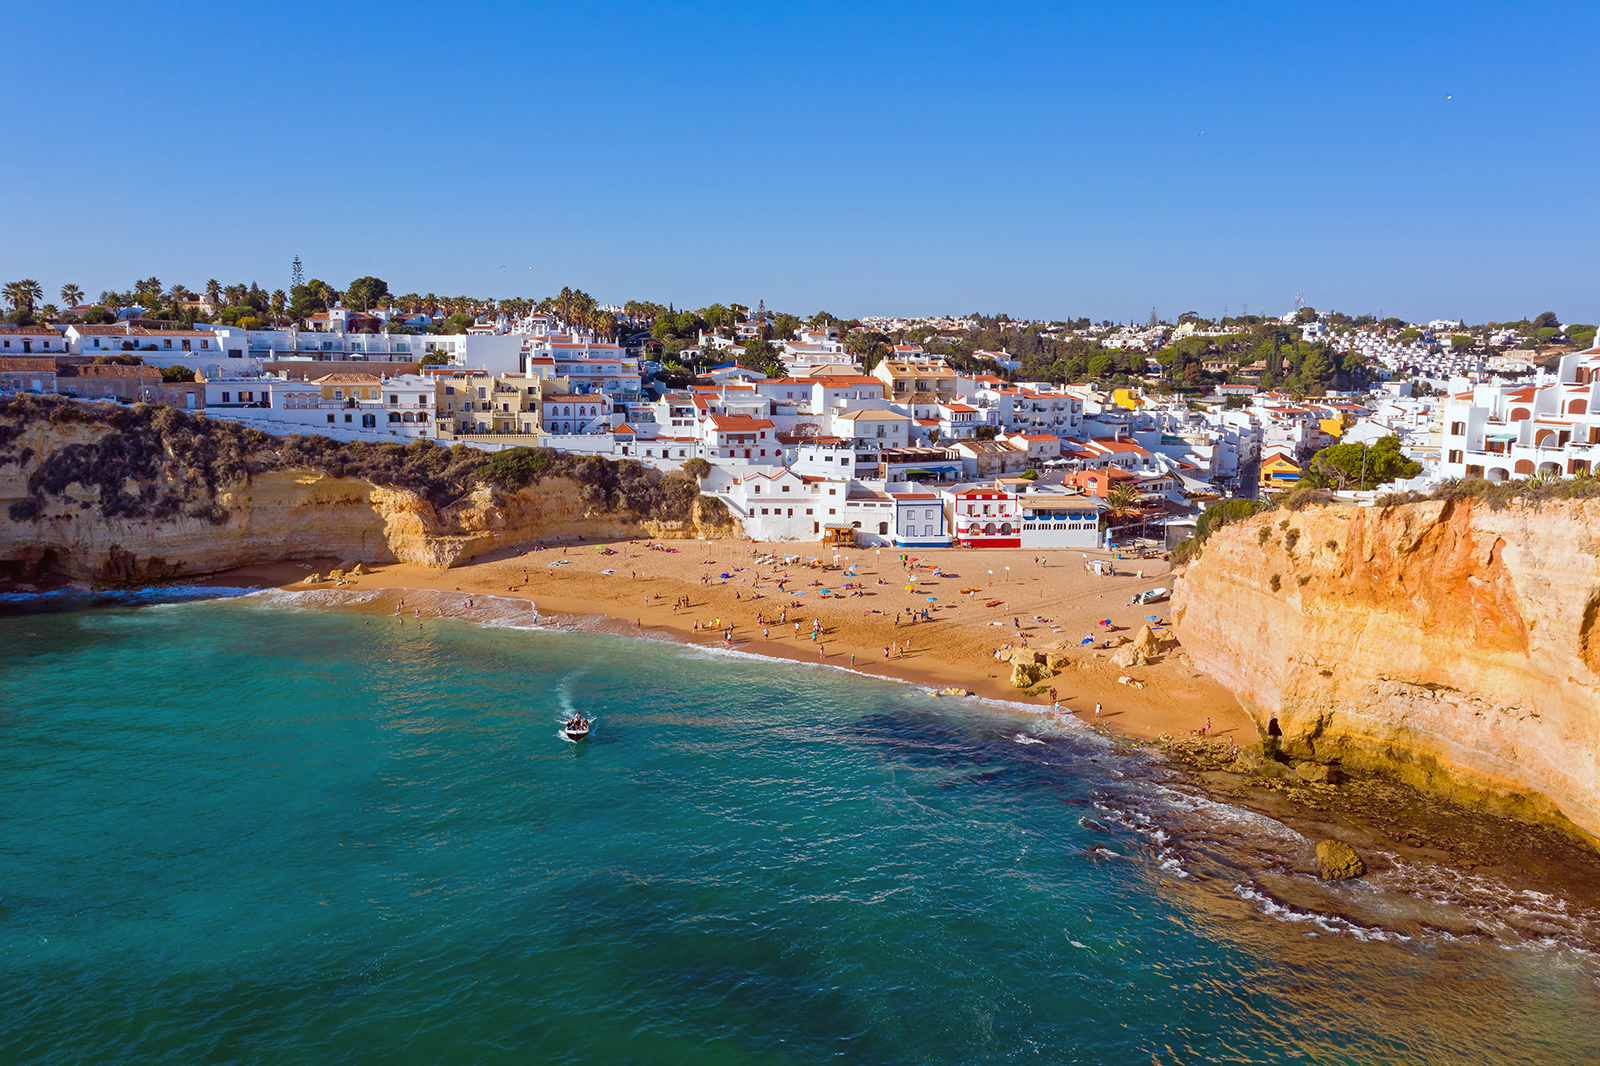 a picture of a traditional beach town in the algarve